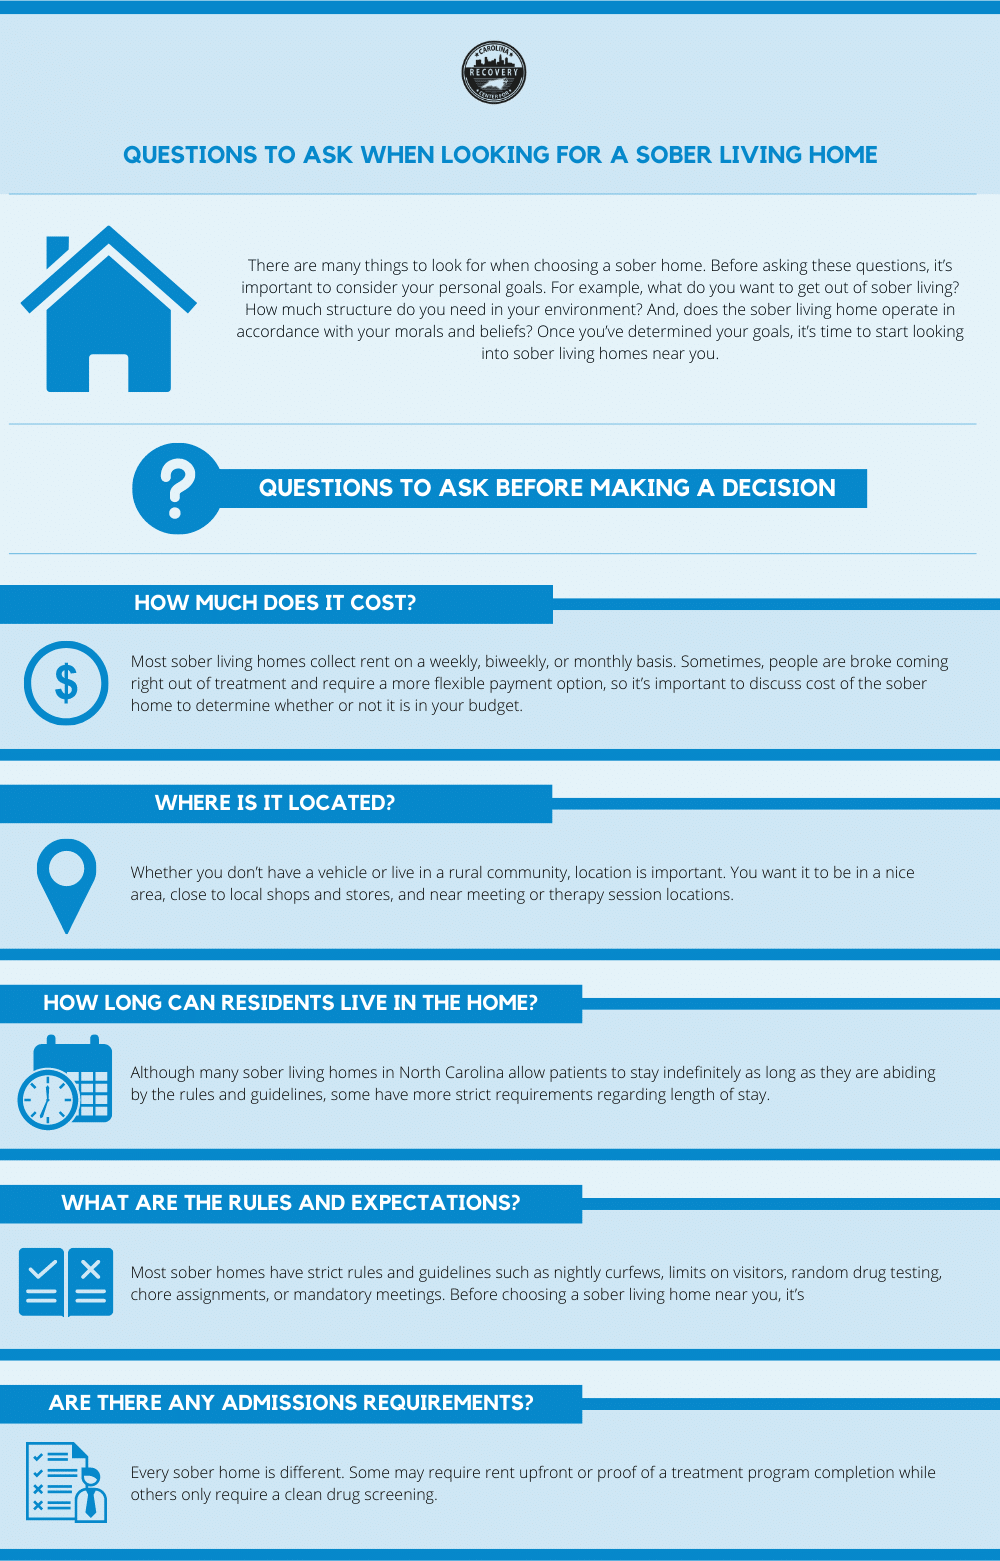 Questions to Ask When Looking For a Sober Living Home